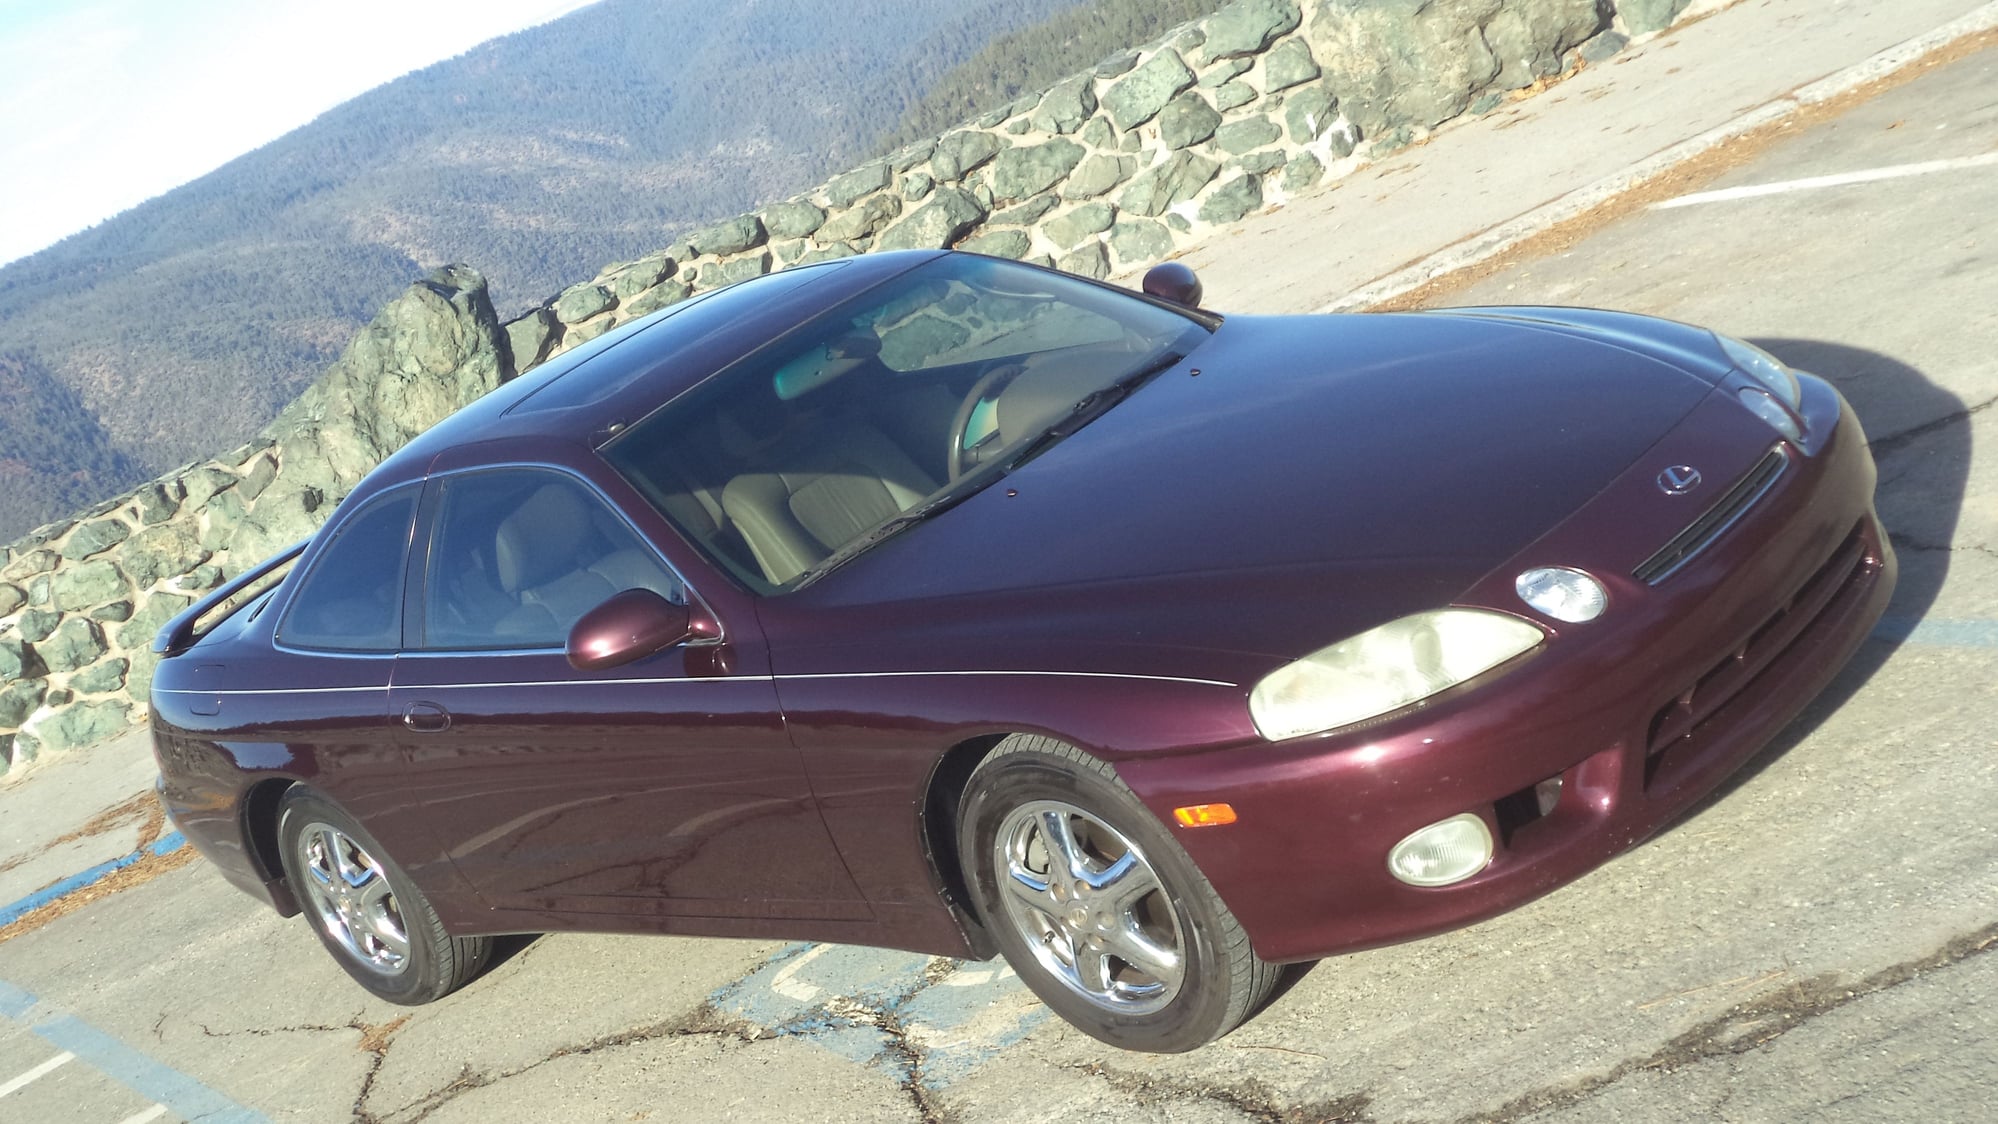 1998 Lexus SC400 - 1 of Only 3200 Porduced with VVTI 300Hp with 5spd Auto Meticulously maintained - Used - VIN JT8CH32Y8W1000744 - 216,000 Miles - 8 cyl - 2WD - Automatic - Coupe - Other - Sacramento, CA 95959, United States